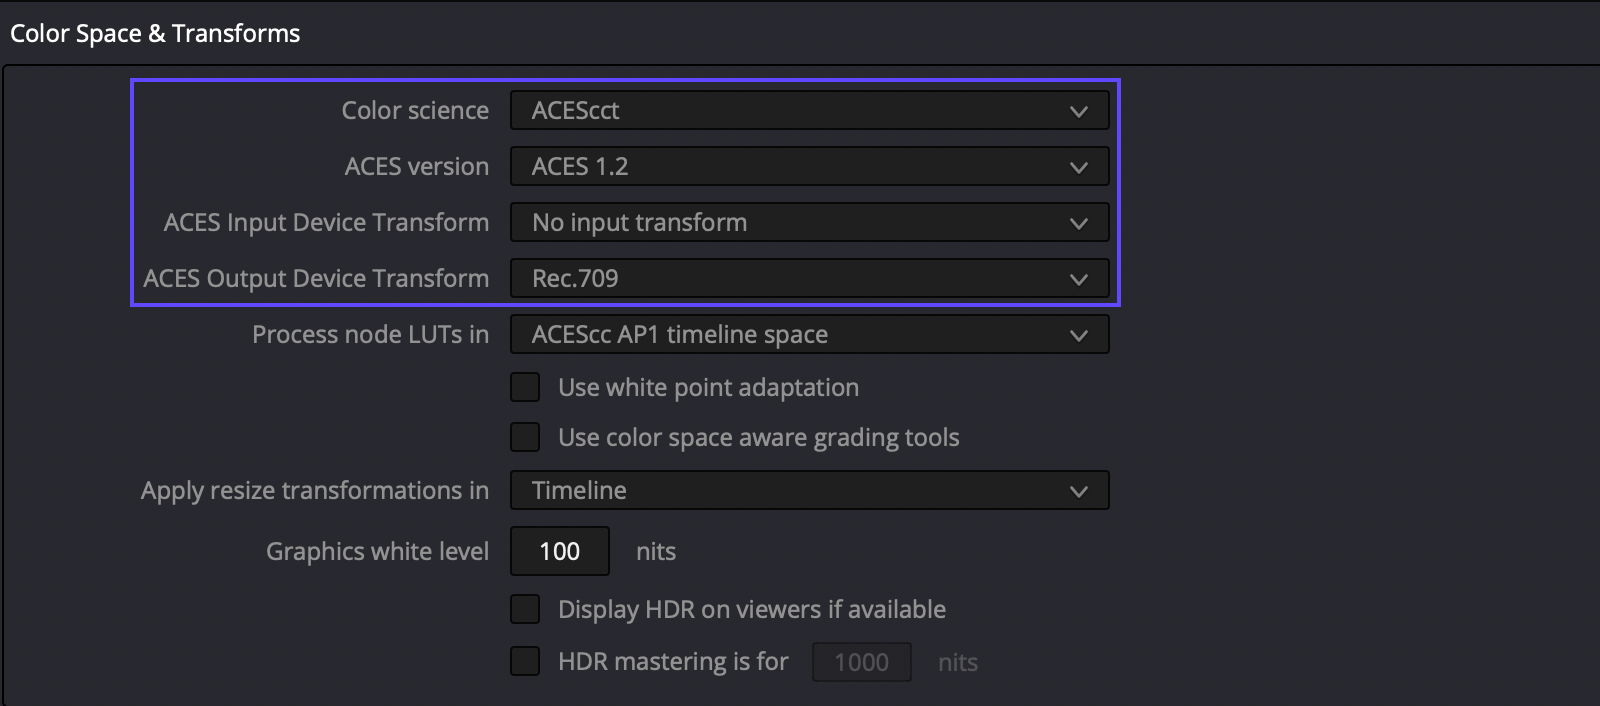 ACES Color Space and Transforms settings in DaVinci Resolve